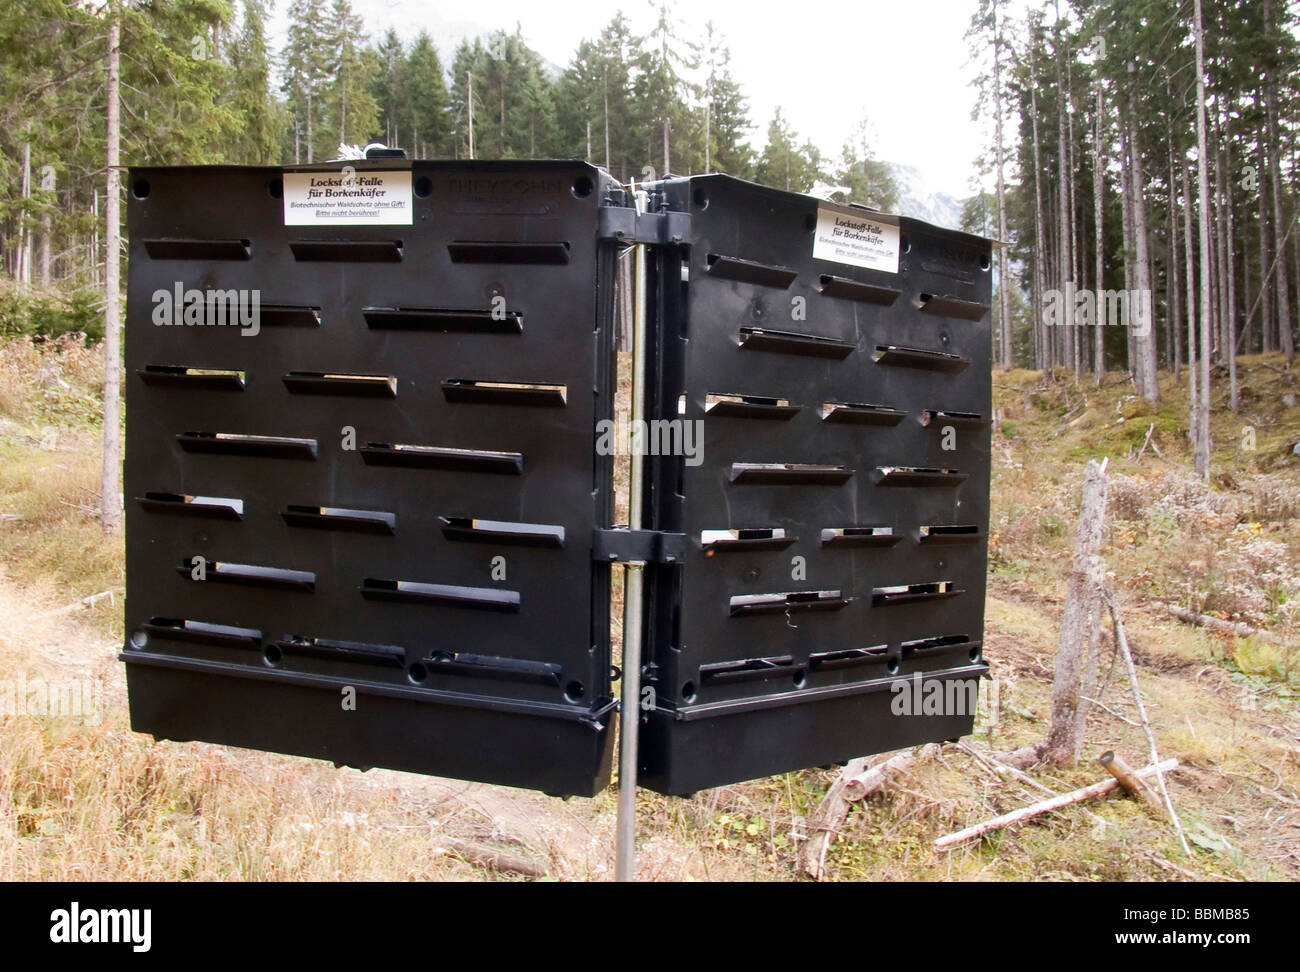 Insect trap for bark beetles, bioengineering, forest protection without toxic substances, Karwendel Range, Tyrol, Austria, Euro Stock Photo